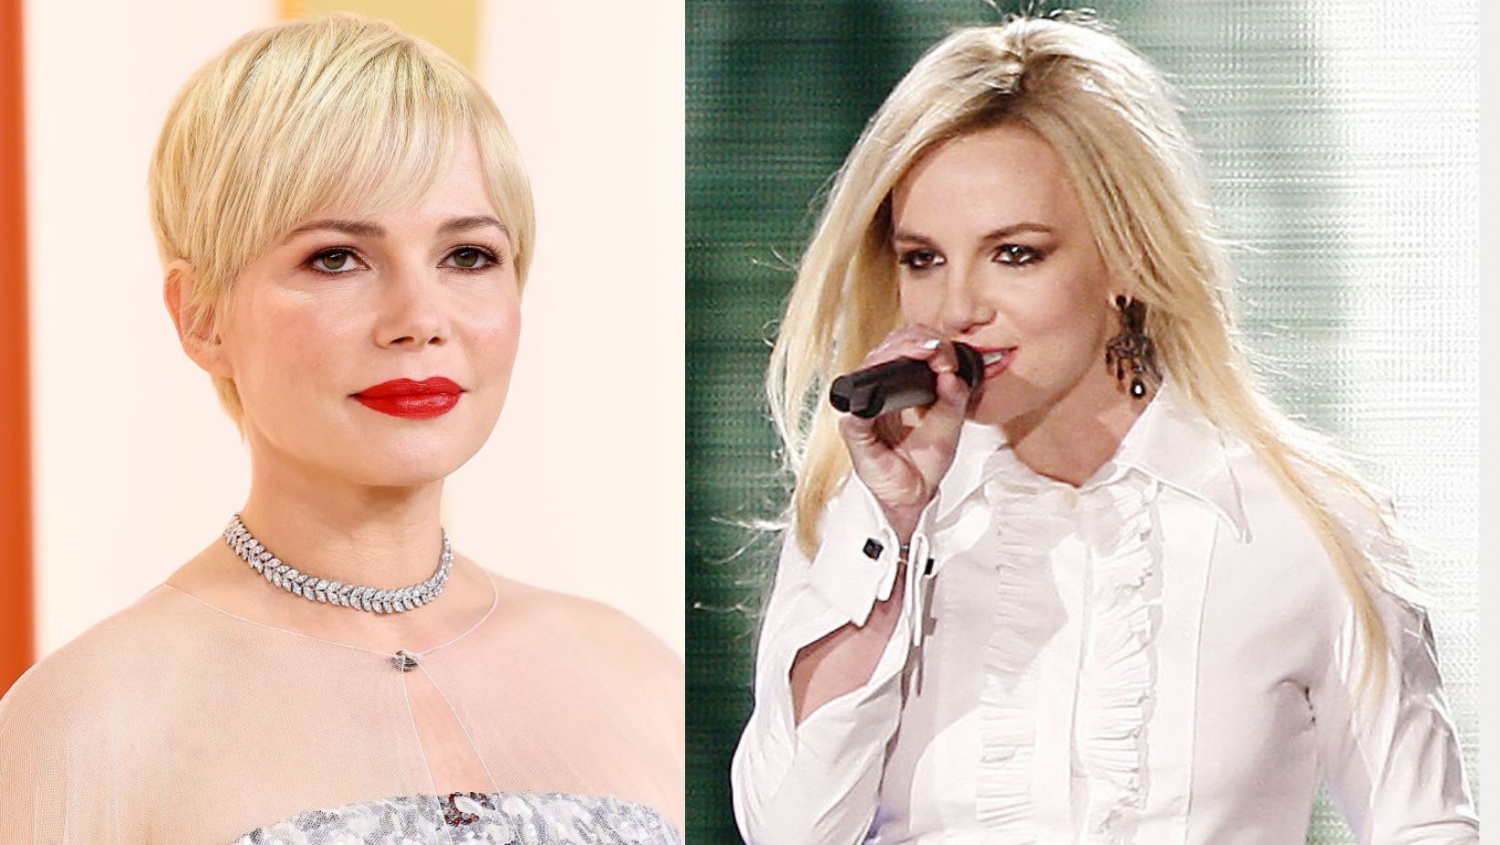 Britney Spears' Memoir 'The Woman in Me' Narrator Michelle Williams on Track For Grammy Award?